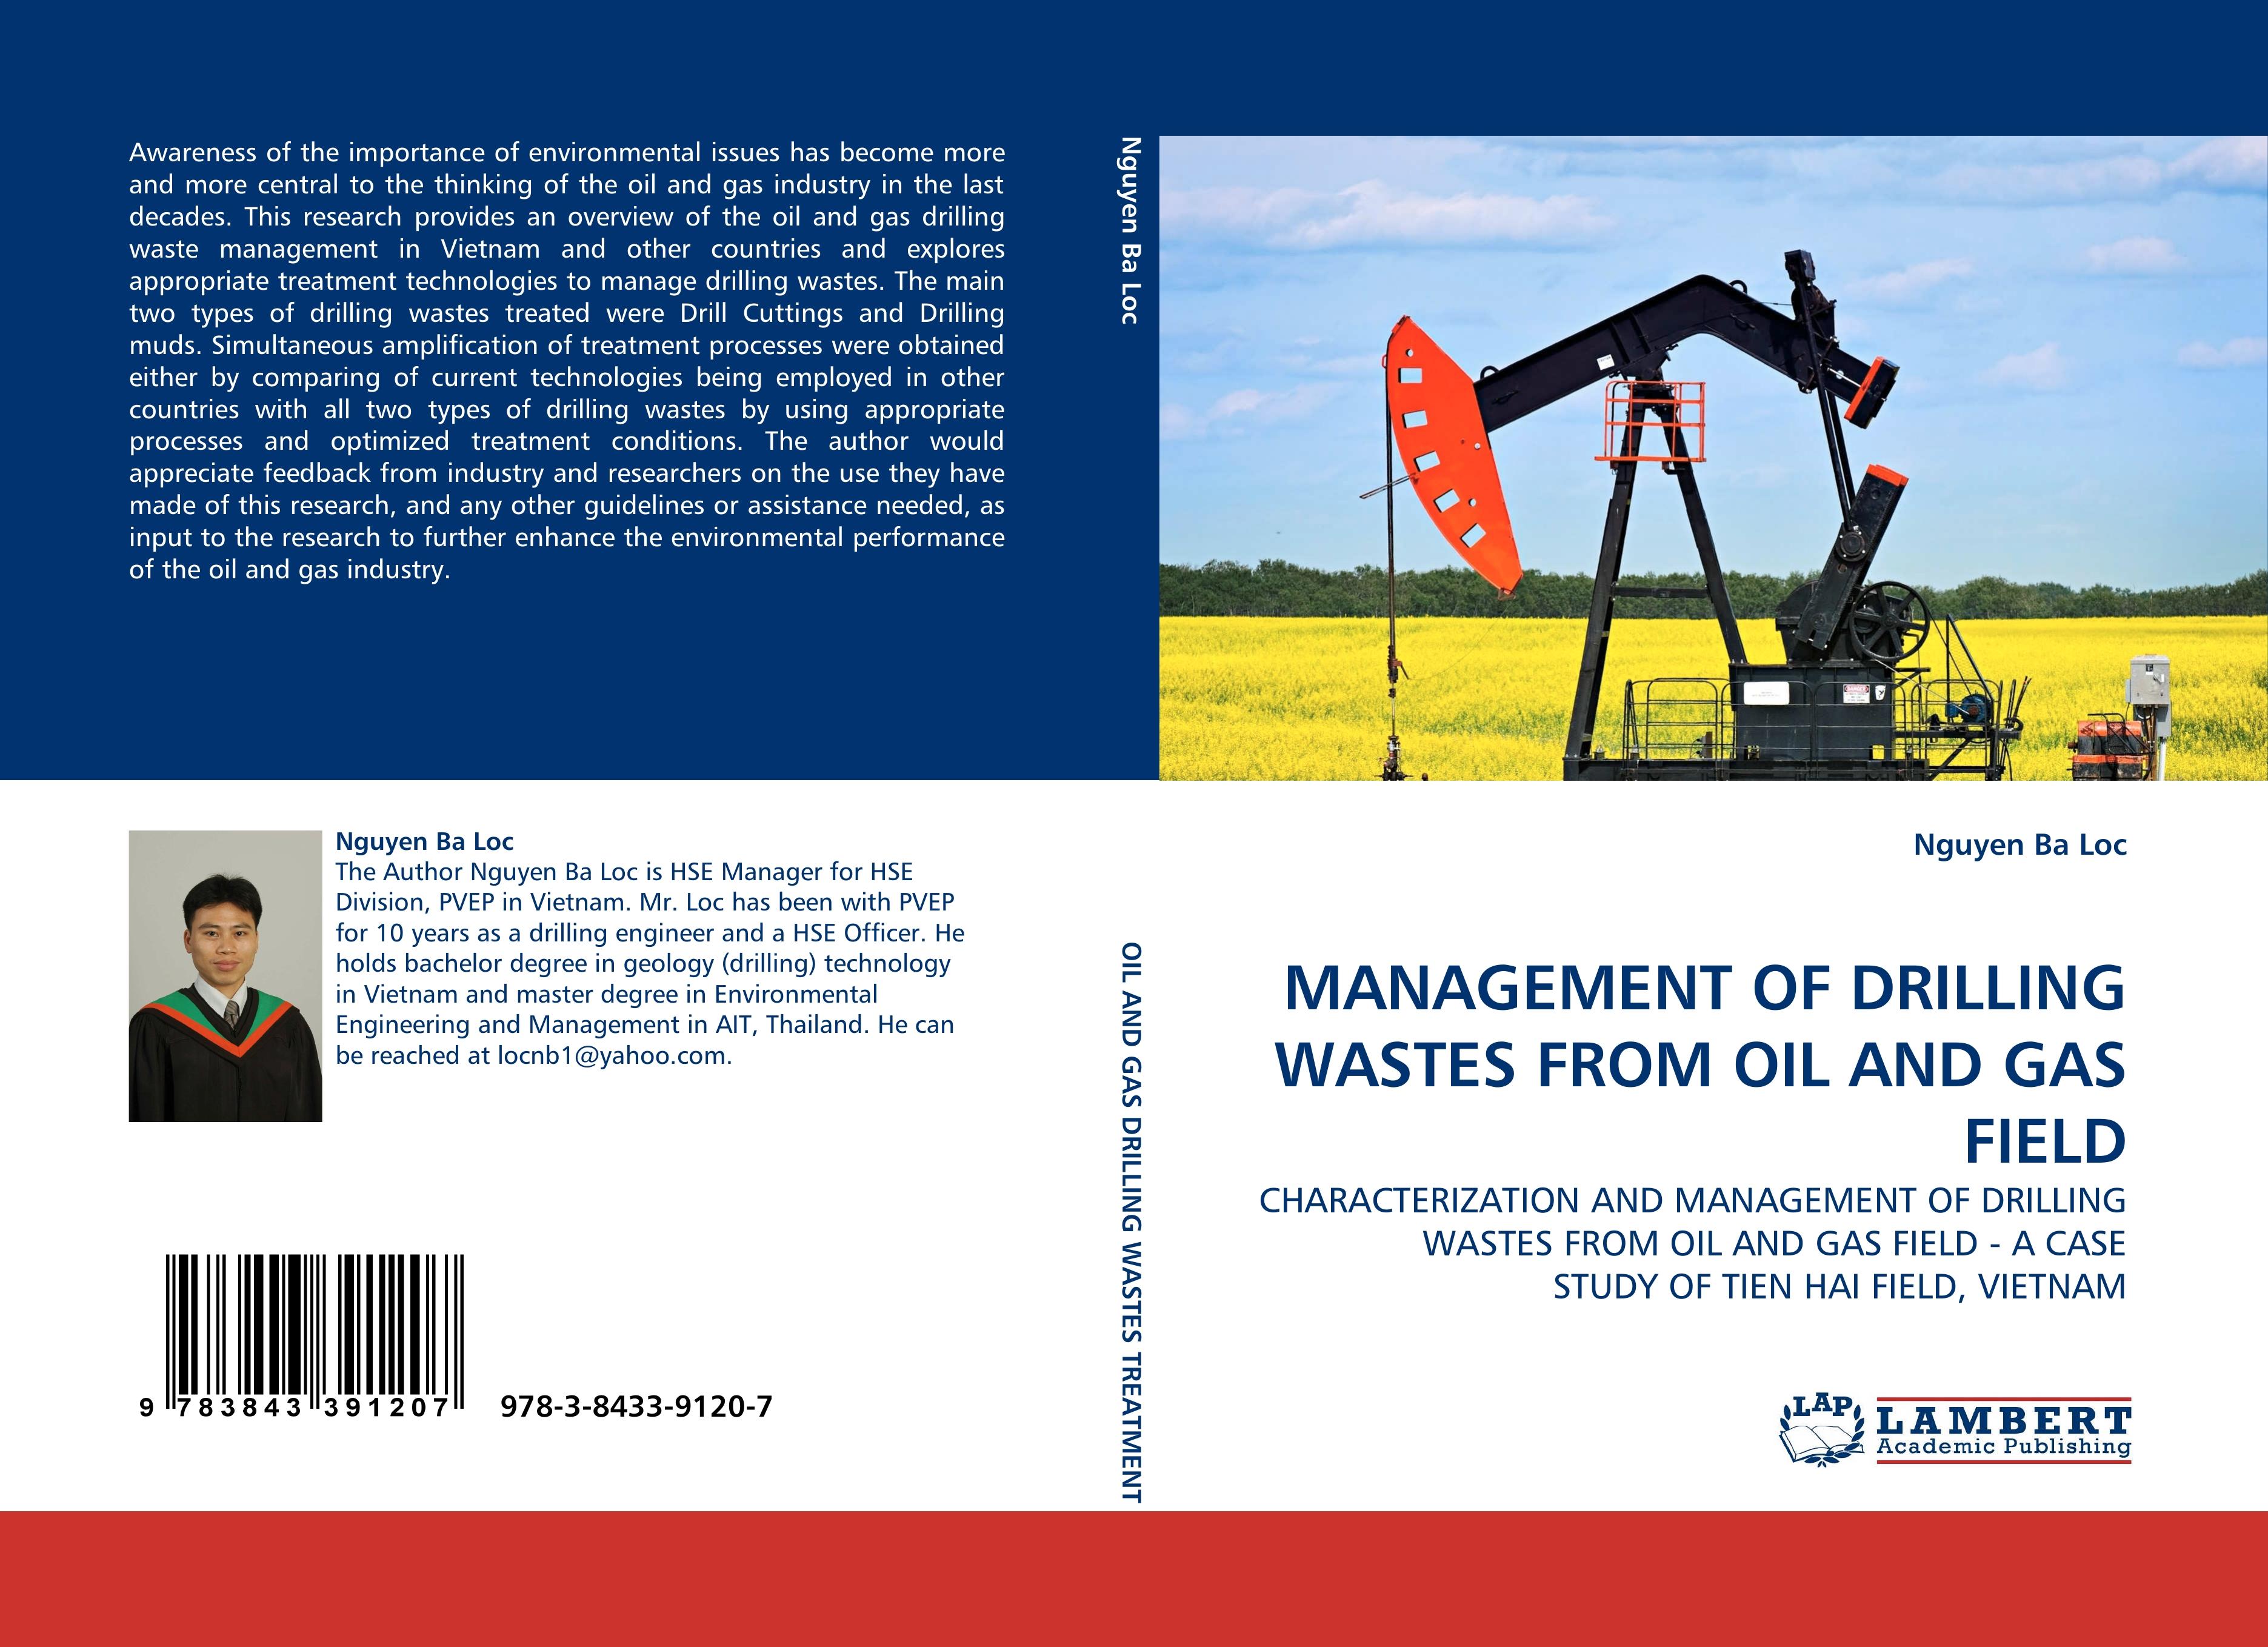 MANAGEMENT OF DRILLING WASTES FROM OIL AND GAS FIELD - Nguyen Ba Loc